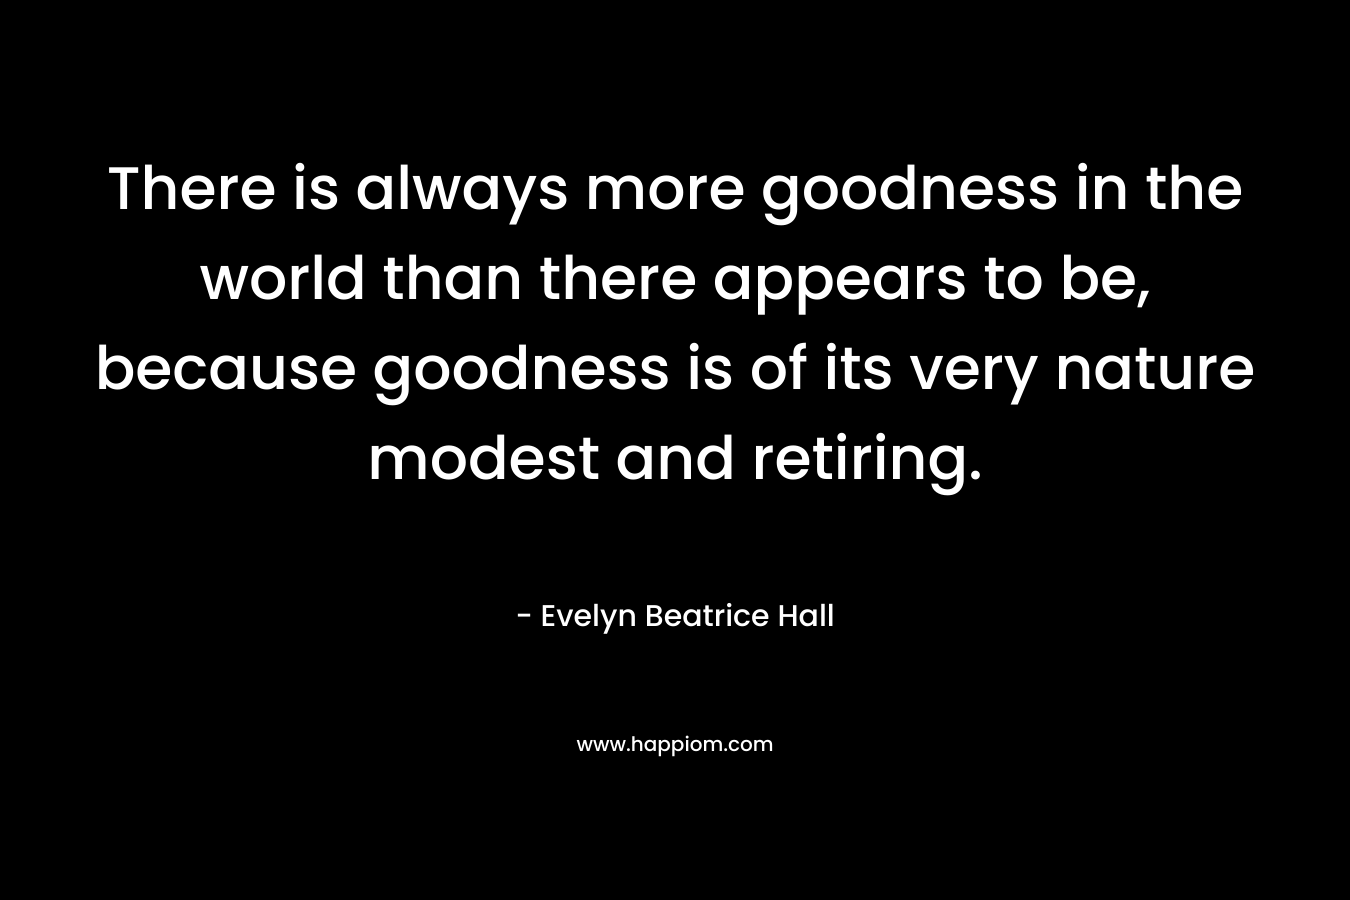 There is always more goodness in the world than there appears to be, because goodness is of its very nature modest and retiring. – Evelyn Beatrice Hall